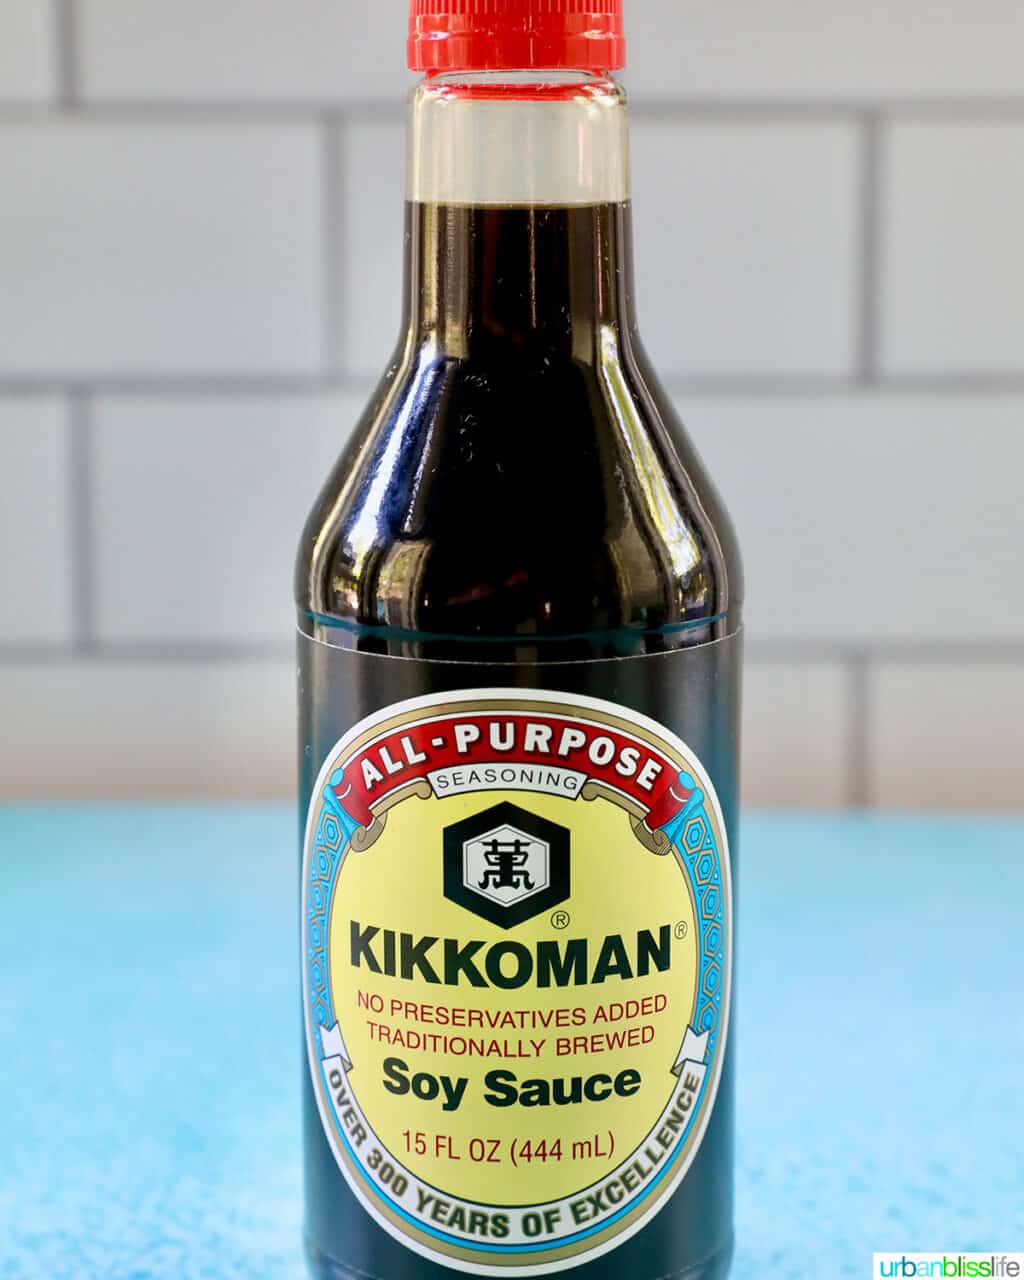 bottle of Kikkoman Soy Sauce on a blue table with white tile background.